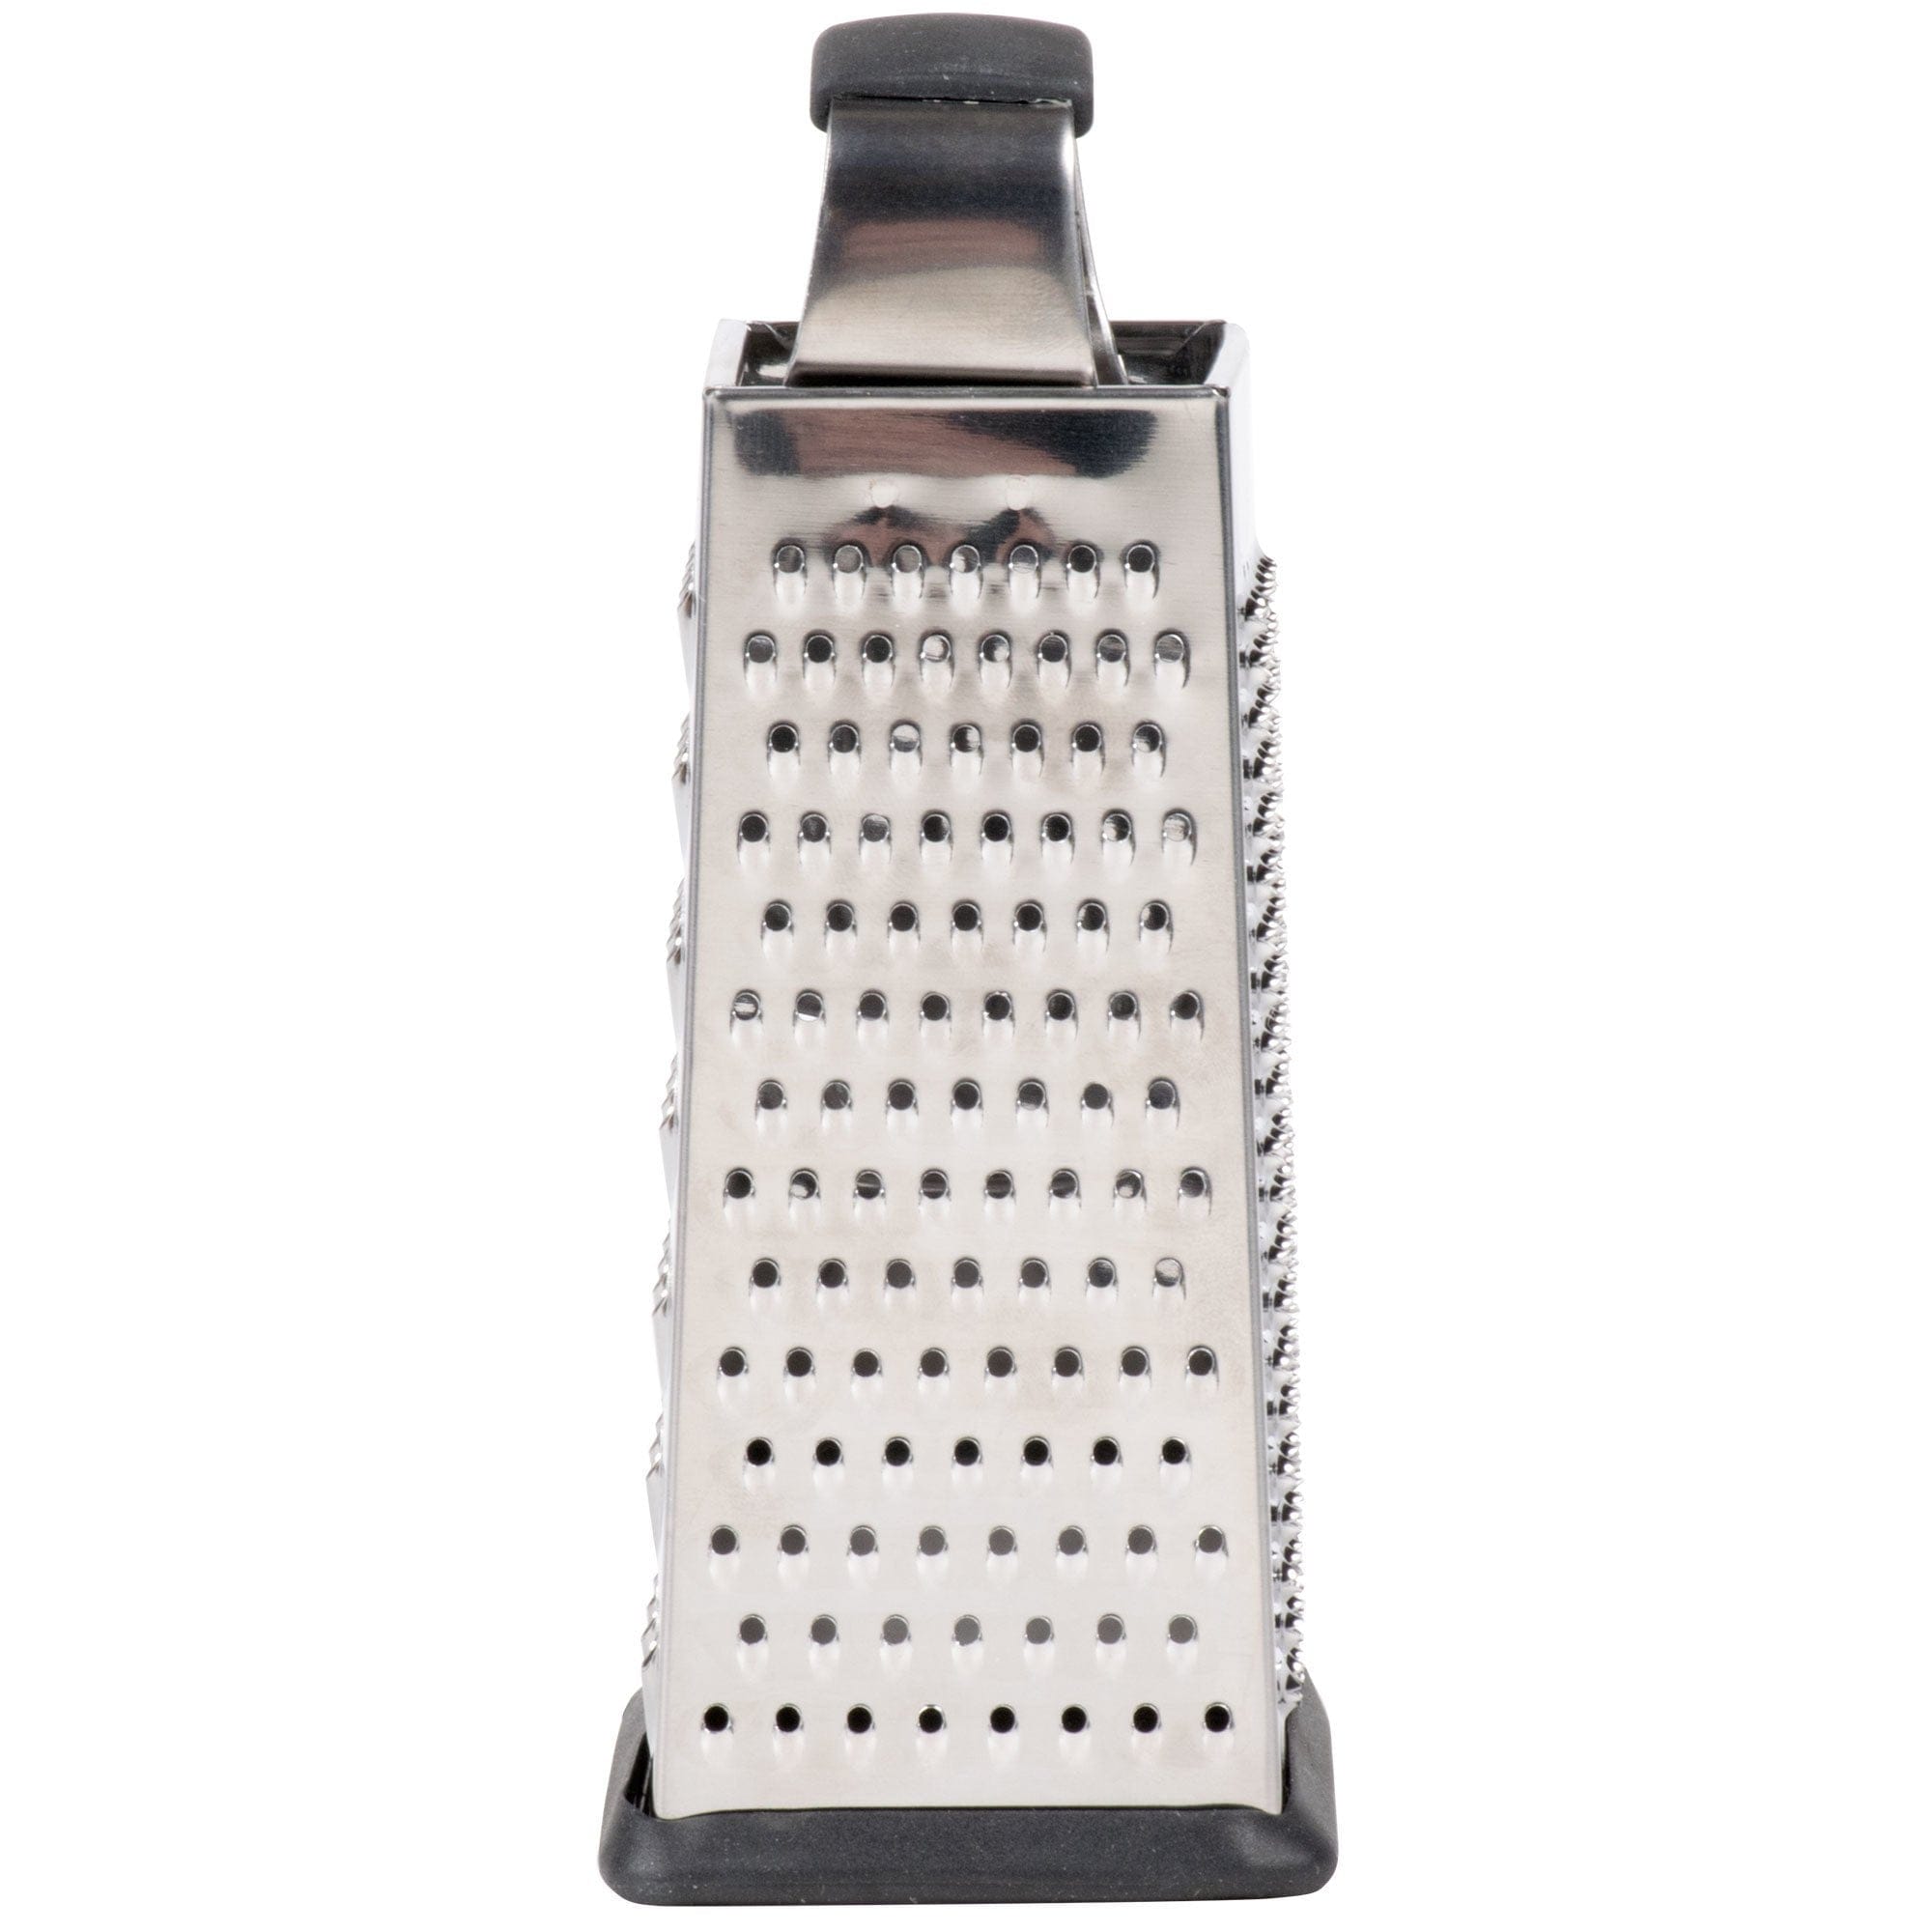 Tablecraft 6 inch Small 4 Sided Stainless Steel Non Slip Grip Box Grater can be used to shred cheese, vegetables, fruits, and more. Made from heavy-duty stainless steel, this grater comes with a hand grip at the top for easy use with both hands-SG203BH